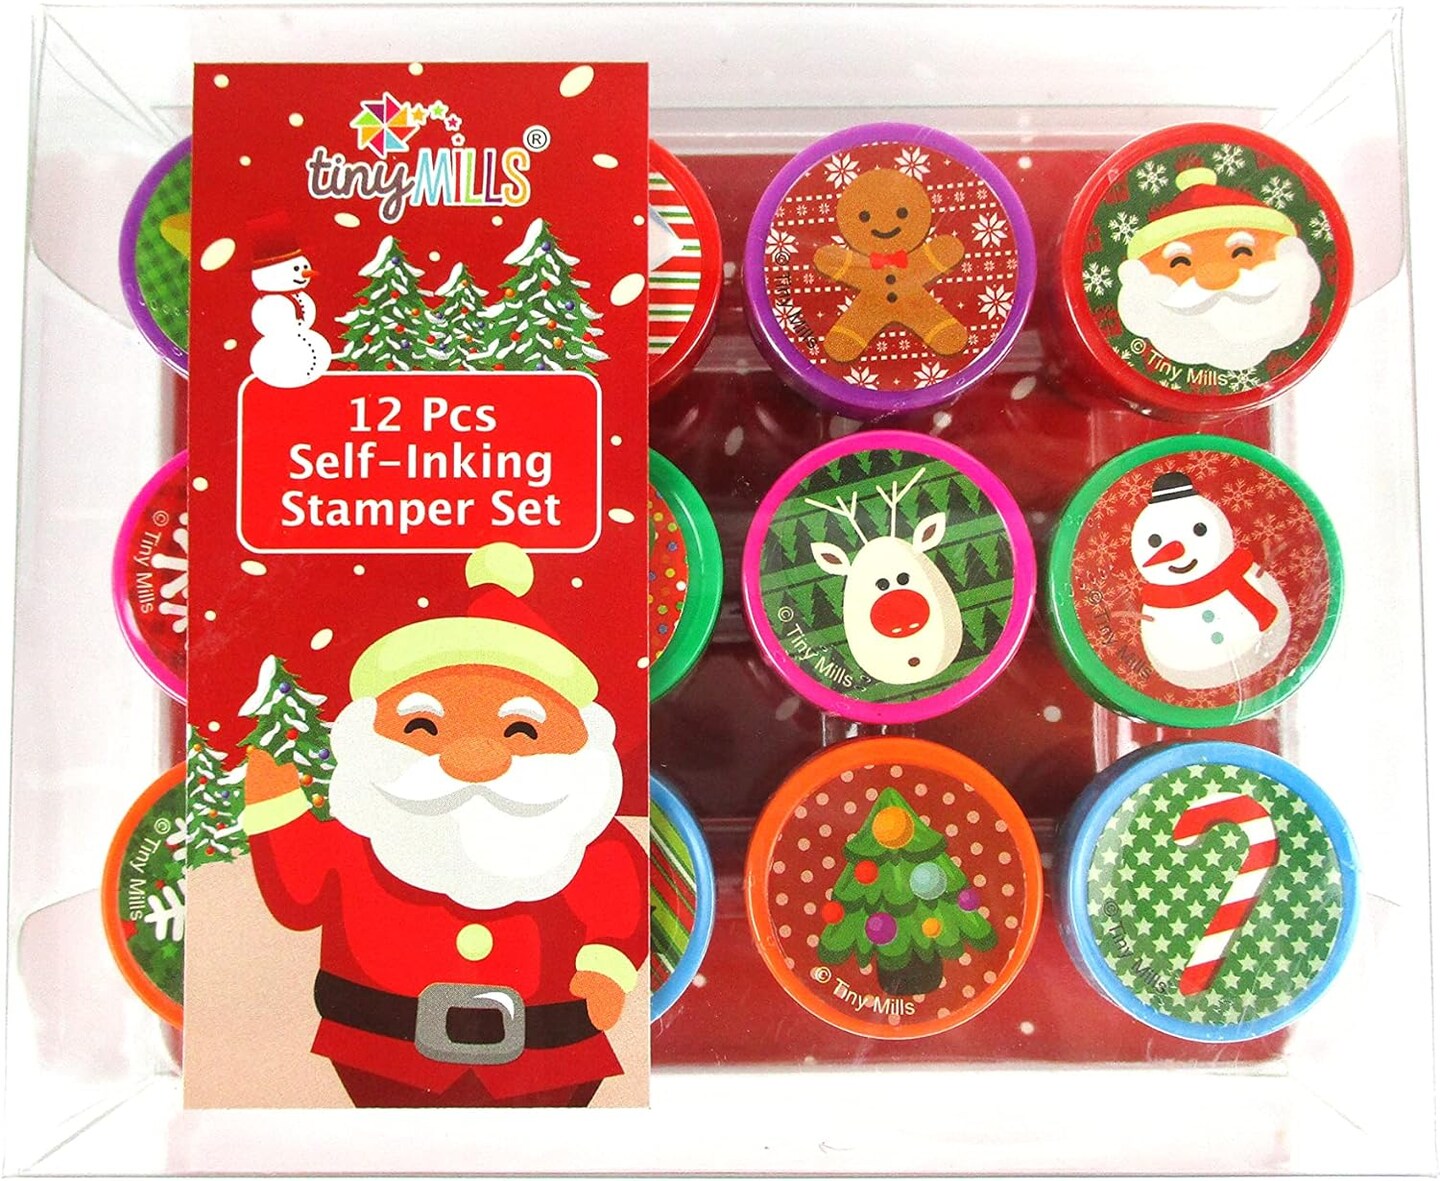 TINYMILLS 12 Pcs Christmas Holiday Stamp Kit for Kids - Christmas Santa Claus Self Inking Stamps Gift Party Favors Stocking Stuffers Holiday Gift Party Rewards&#x2026;